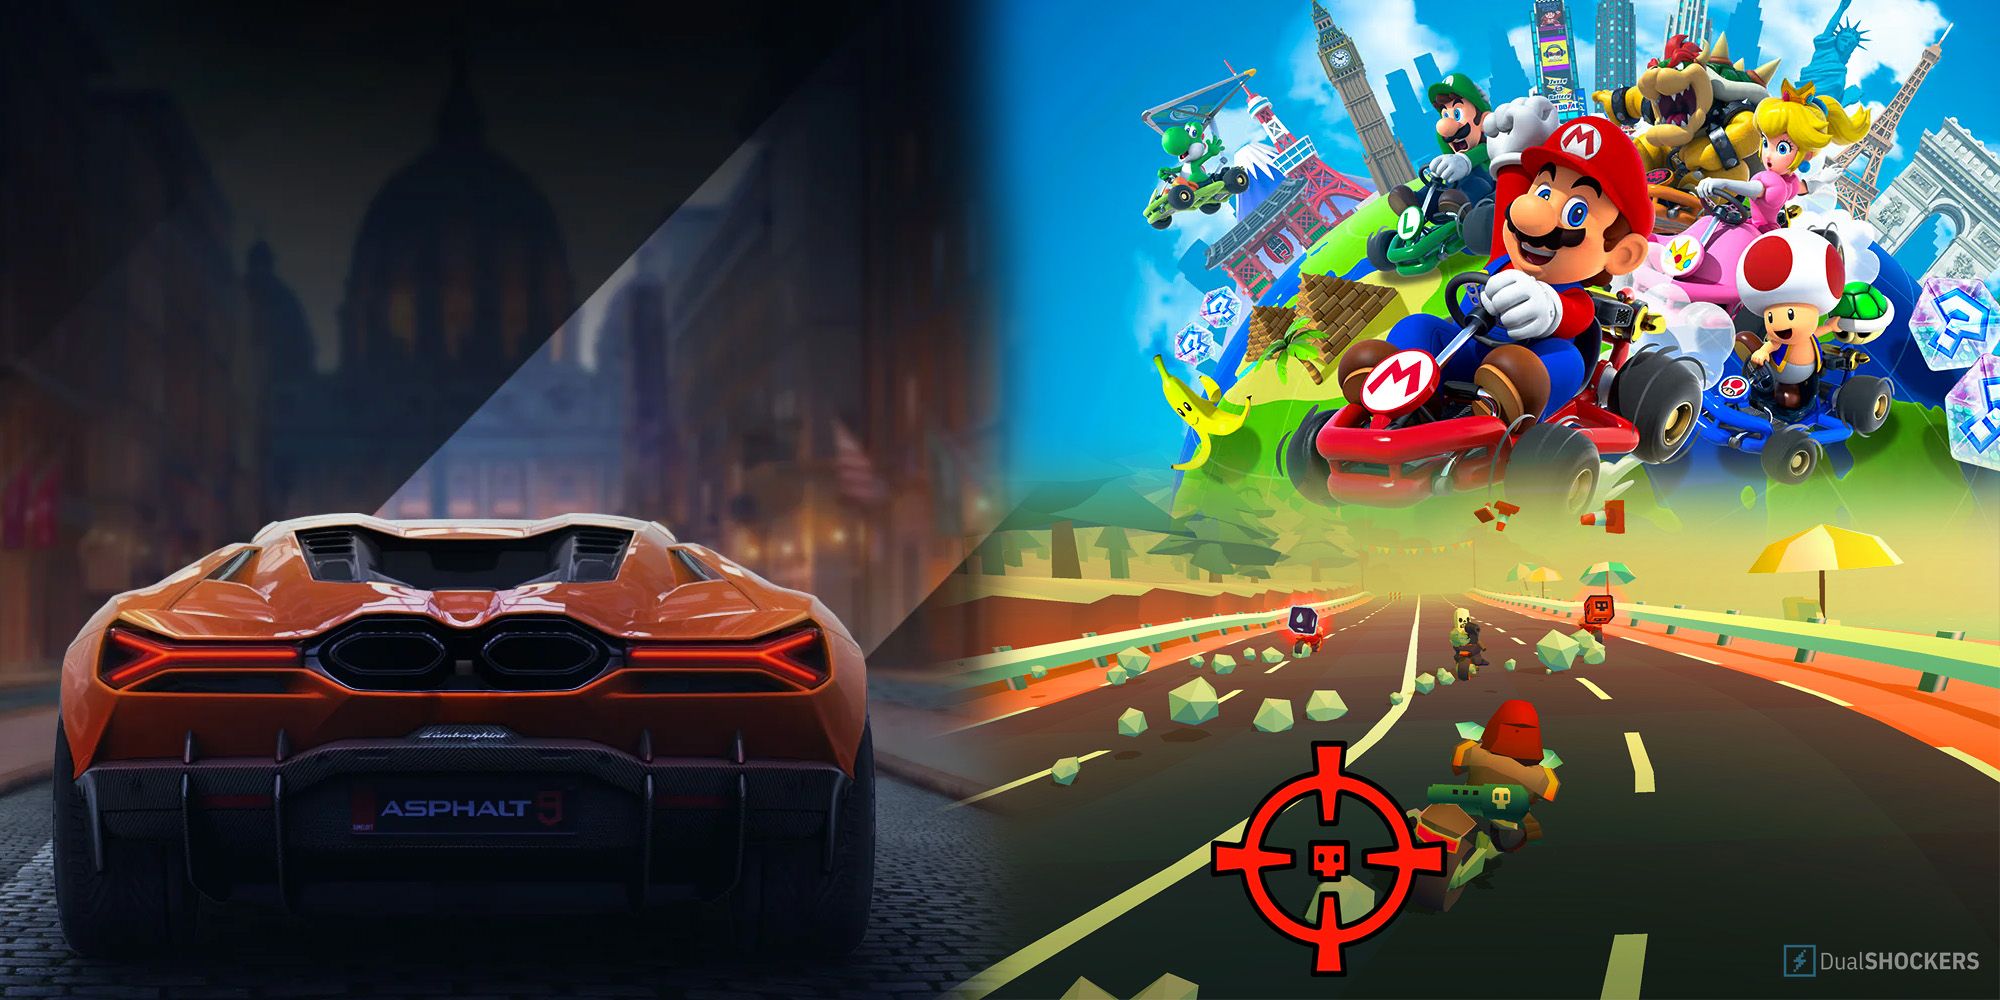 Featured Image for Best Mobile Racing Games, Asphalt 9, Mario Kart Tour, Hell Rider from left to right